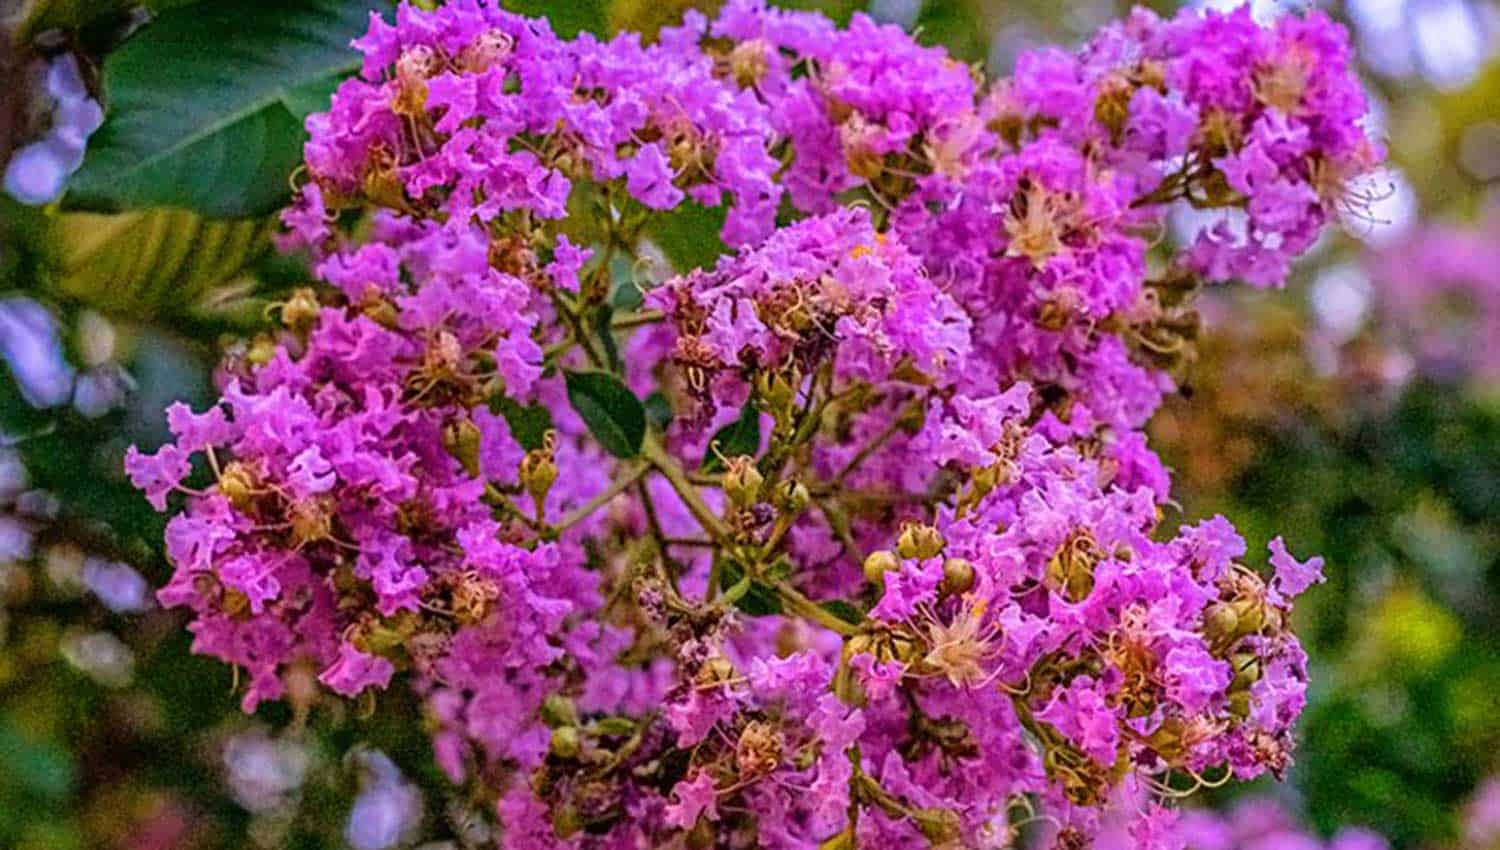 Medium pink crinkled blooms with yellow centers make full bloom heads on MIss Sandra Crapemyrtle